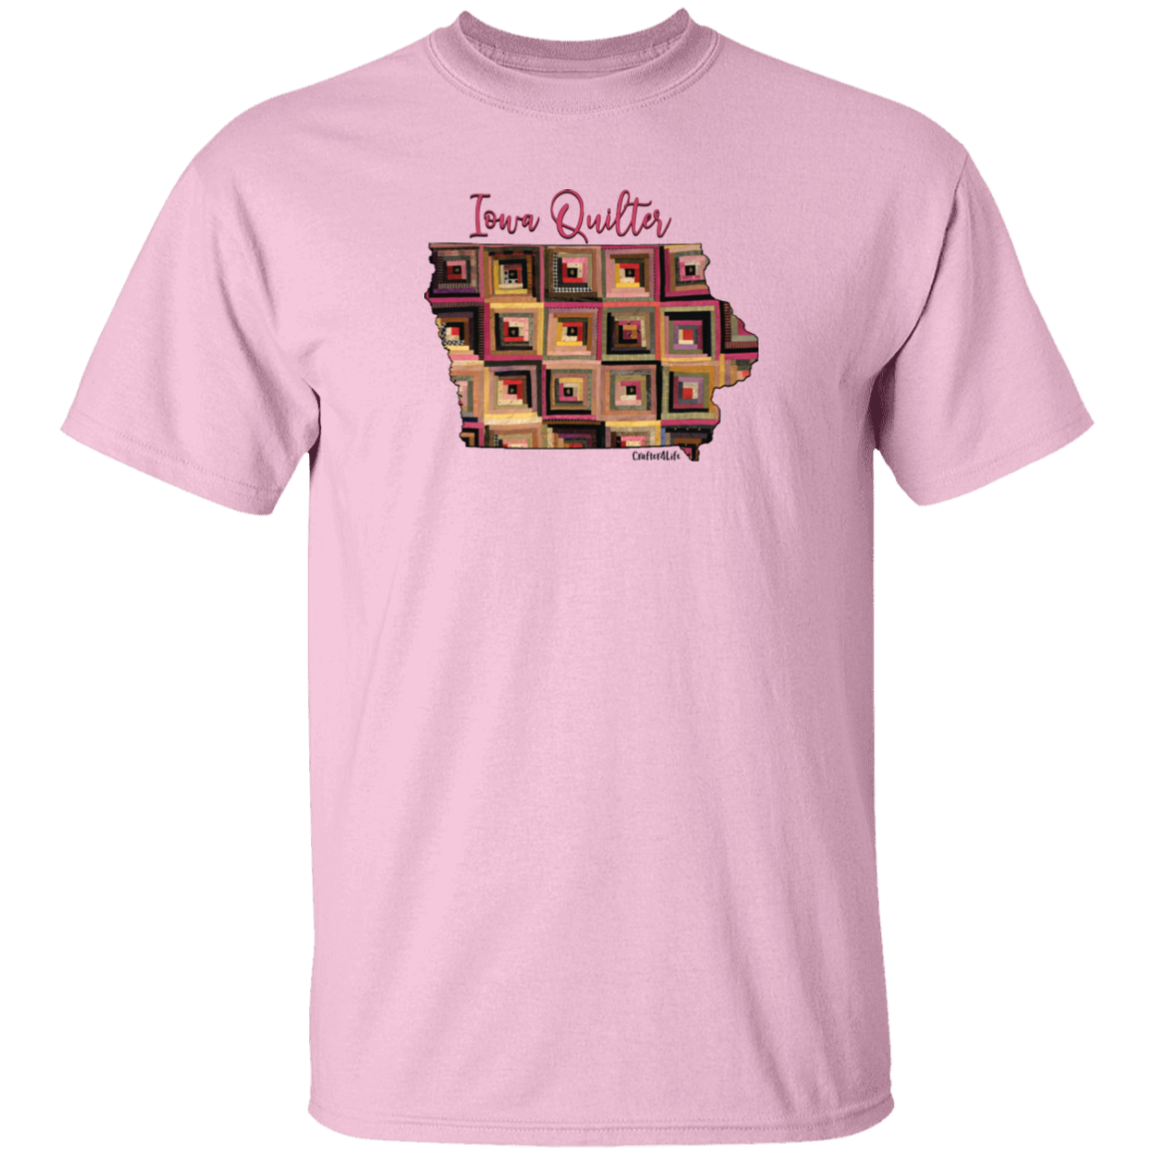 Iowa Quilter T-Shirt, Gift for Quilting Friends and Family